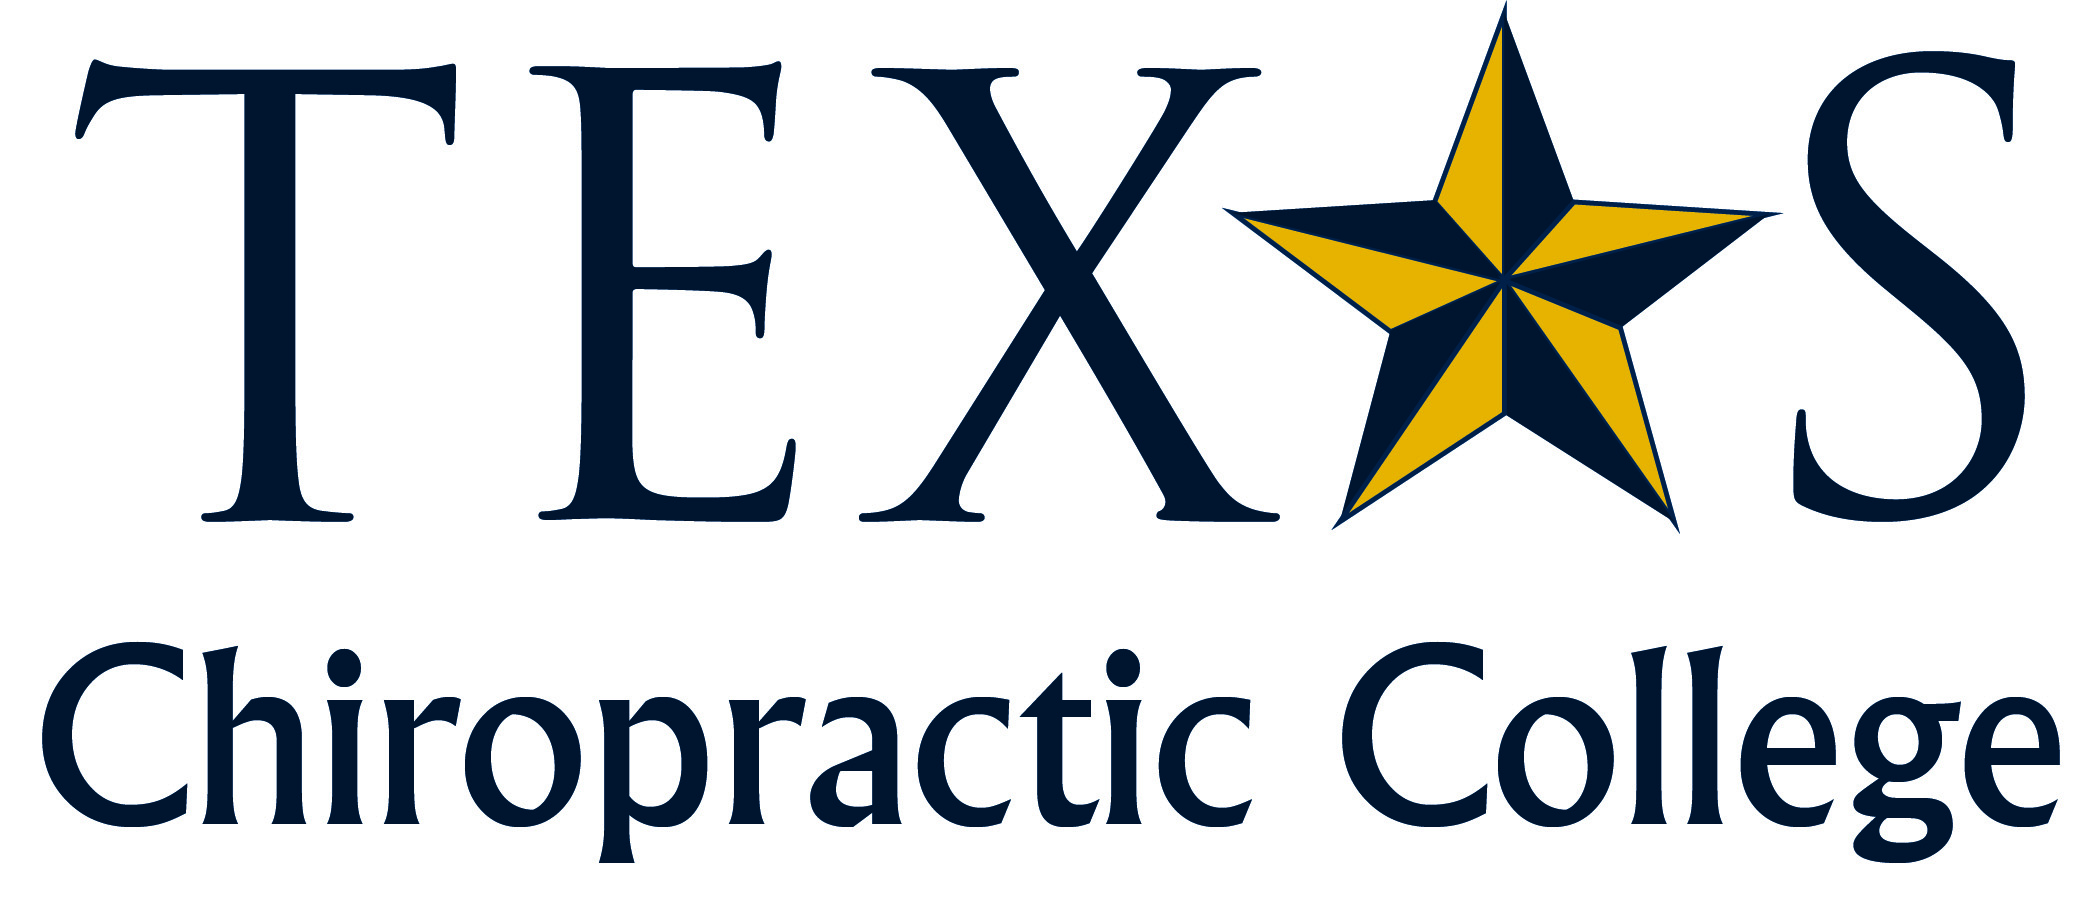 New York Chiropractic CE Courses